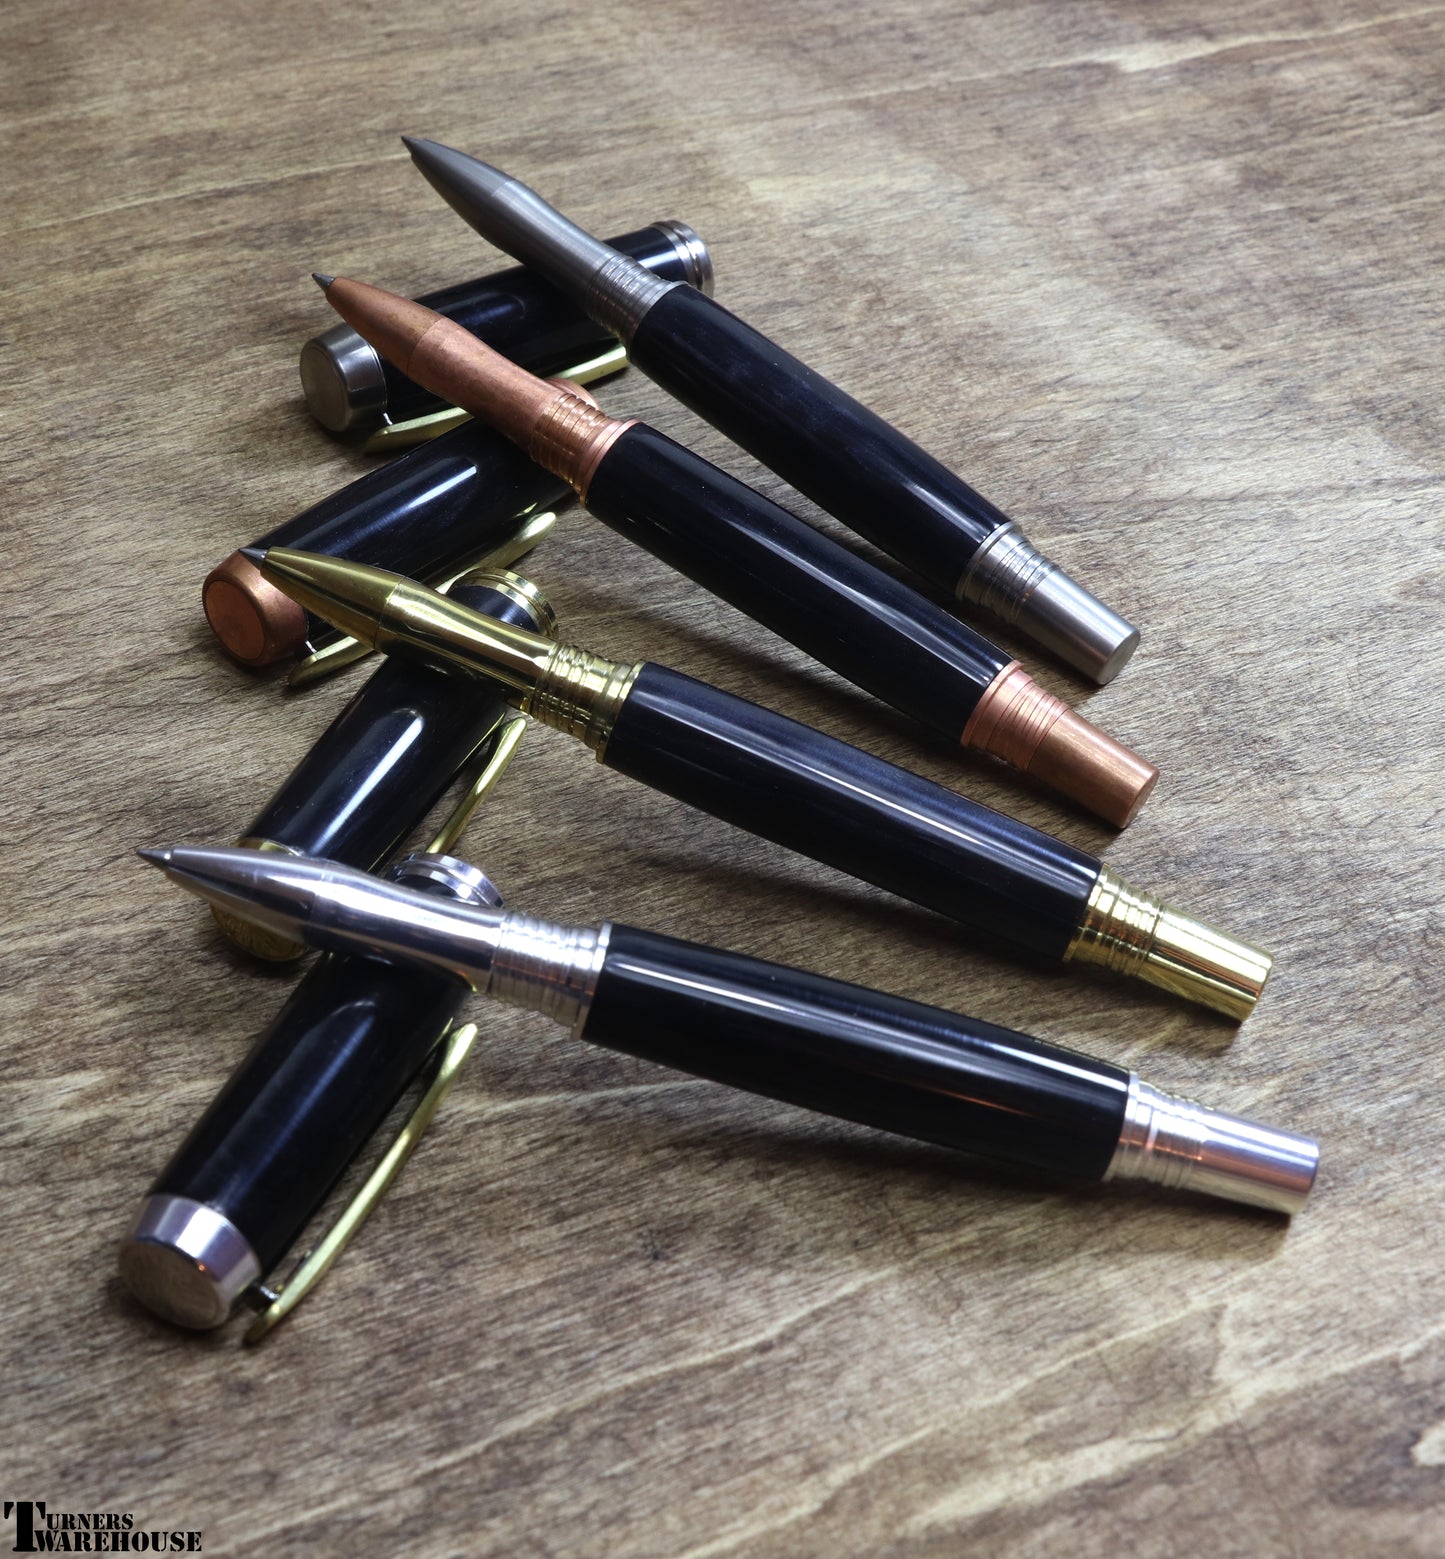  Element Series Jr Series Pen Kit Aluminum, Brass, Copper and Stainless Steel 